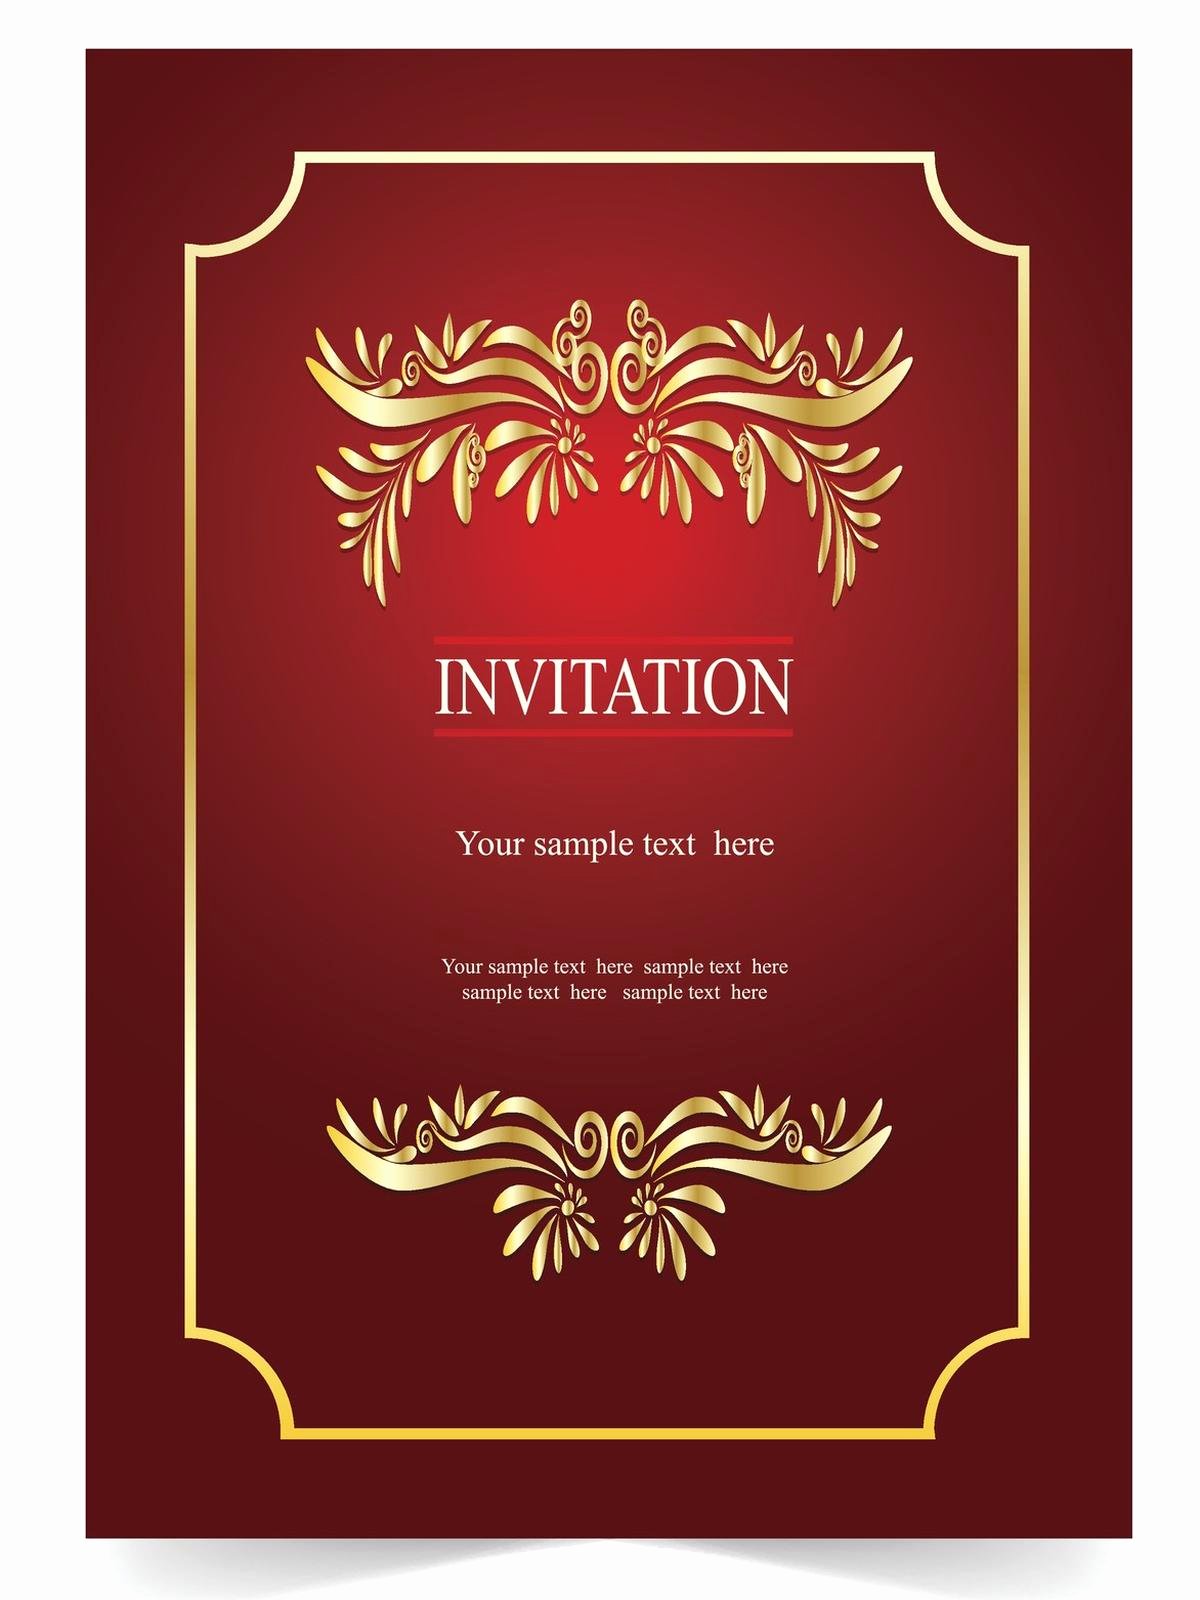 Farewell Party Invitation Wording Lovely 10 Farewell Party Invitation Wordings to Bid Goodbye In Style